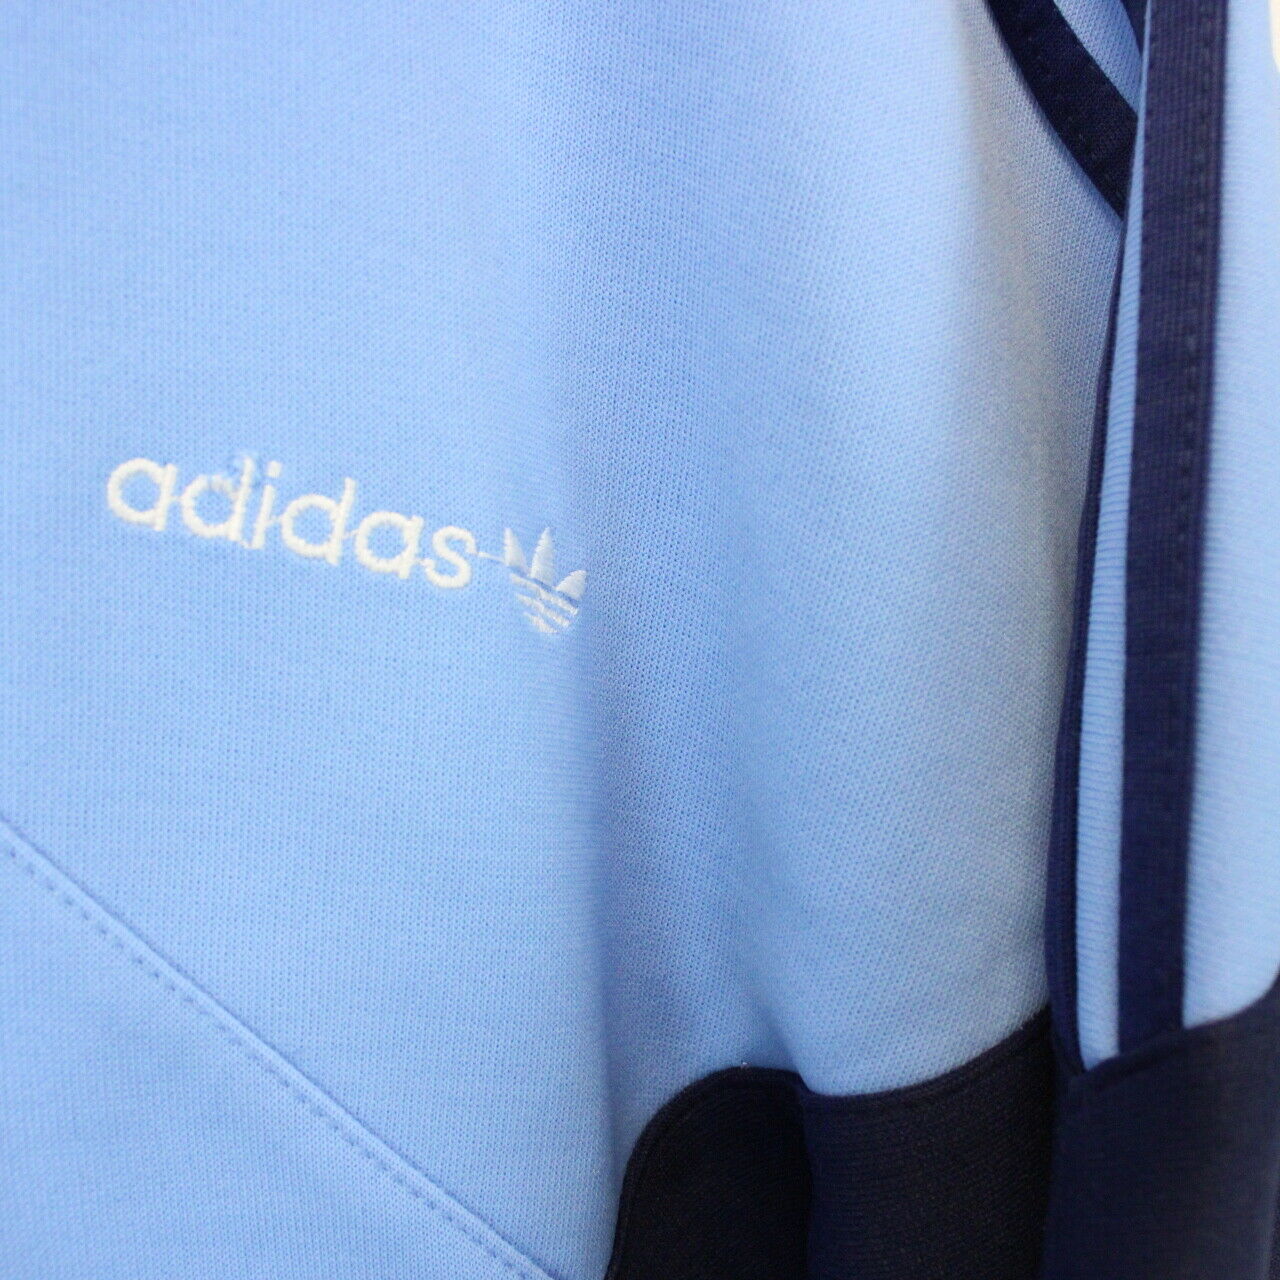 ADIDAS 90s Track Top Blue | Large